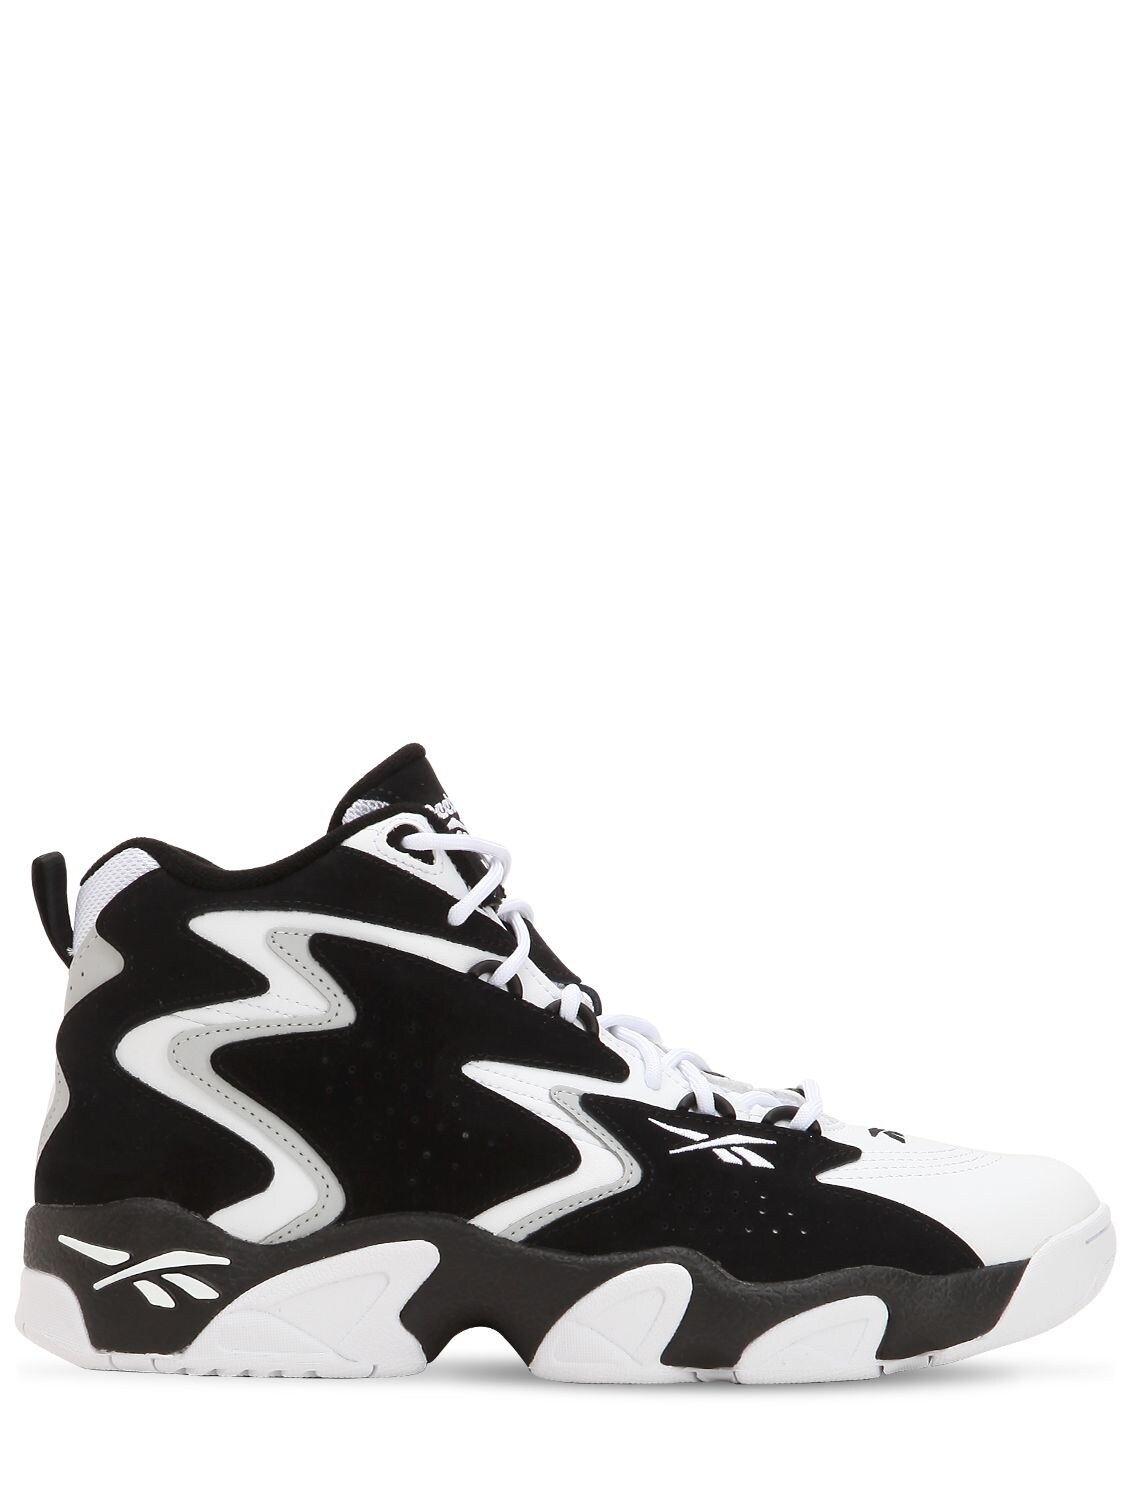 Reebok X Pyer Moss Mobius Og Leather Sneakers In Black/white